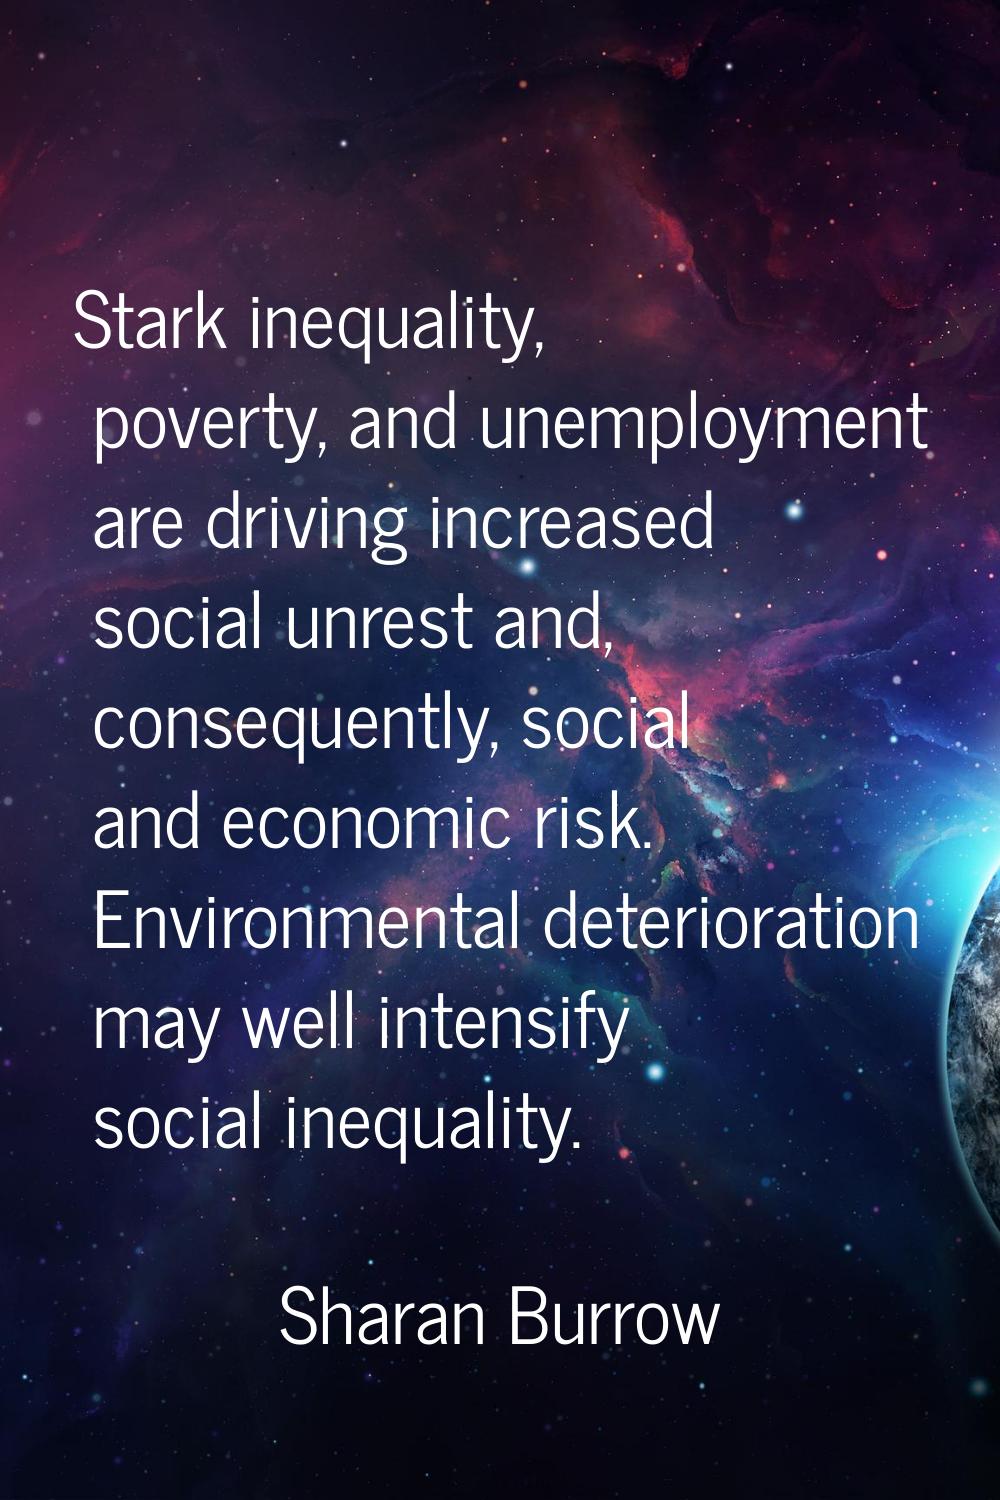 Stark inequality, poverty, and unemployment are driving increased social unrest and, consequently, 